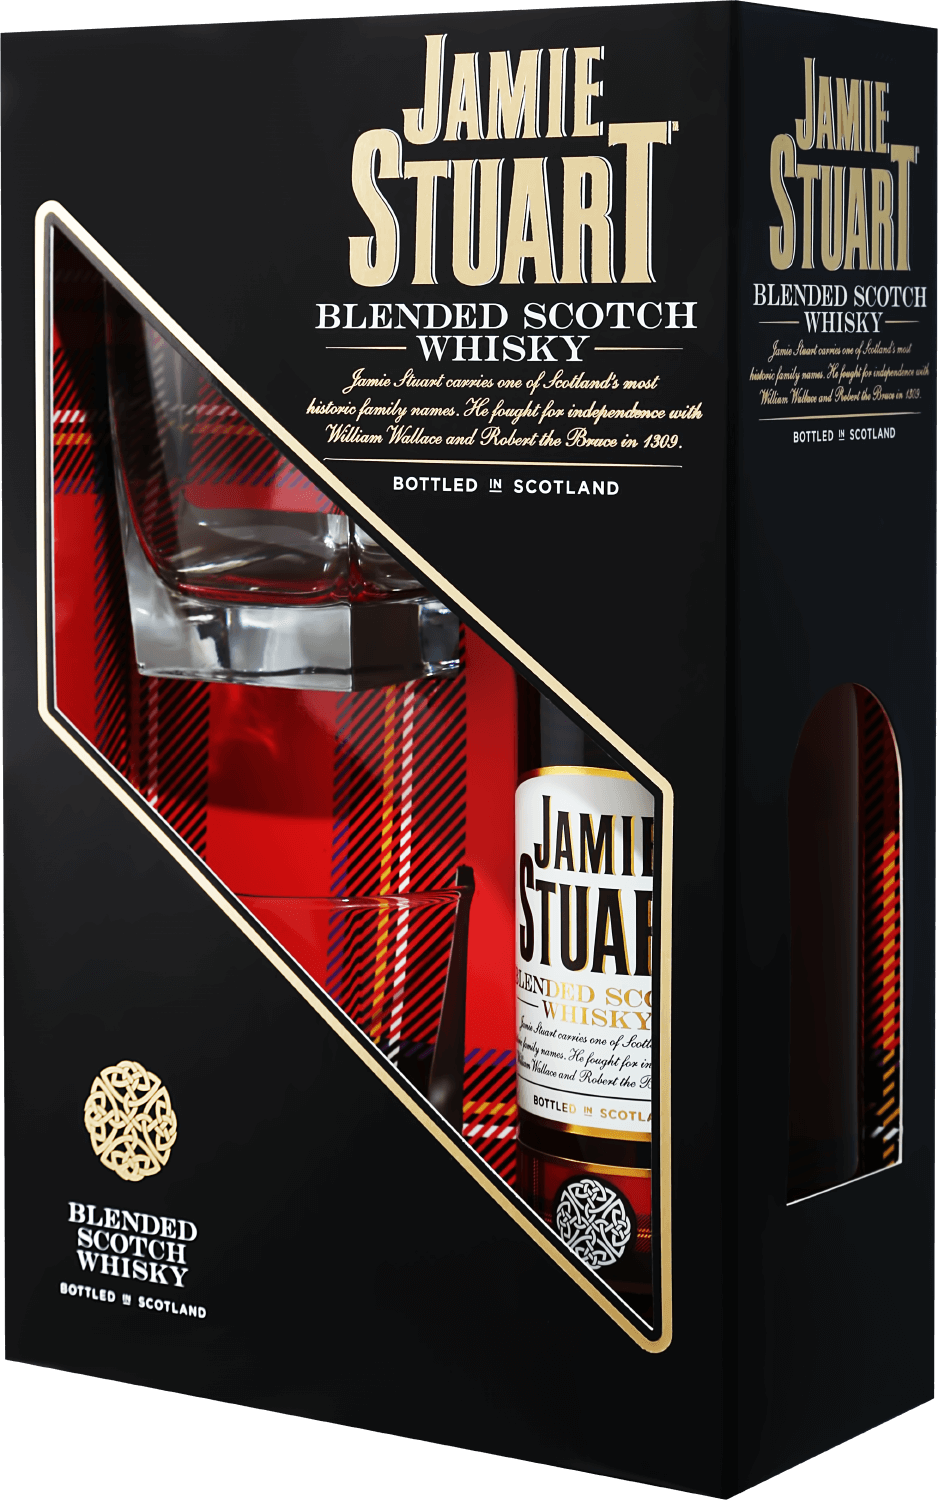 Jamie Stuart Blended Scotch Whisky 3 y.o. (gift box with 2 glasses) 44647